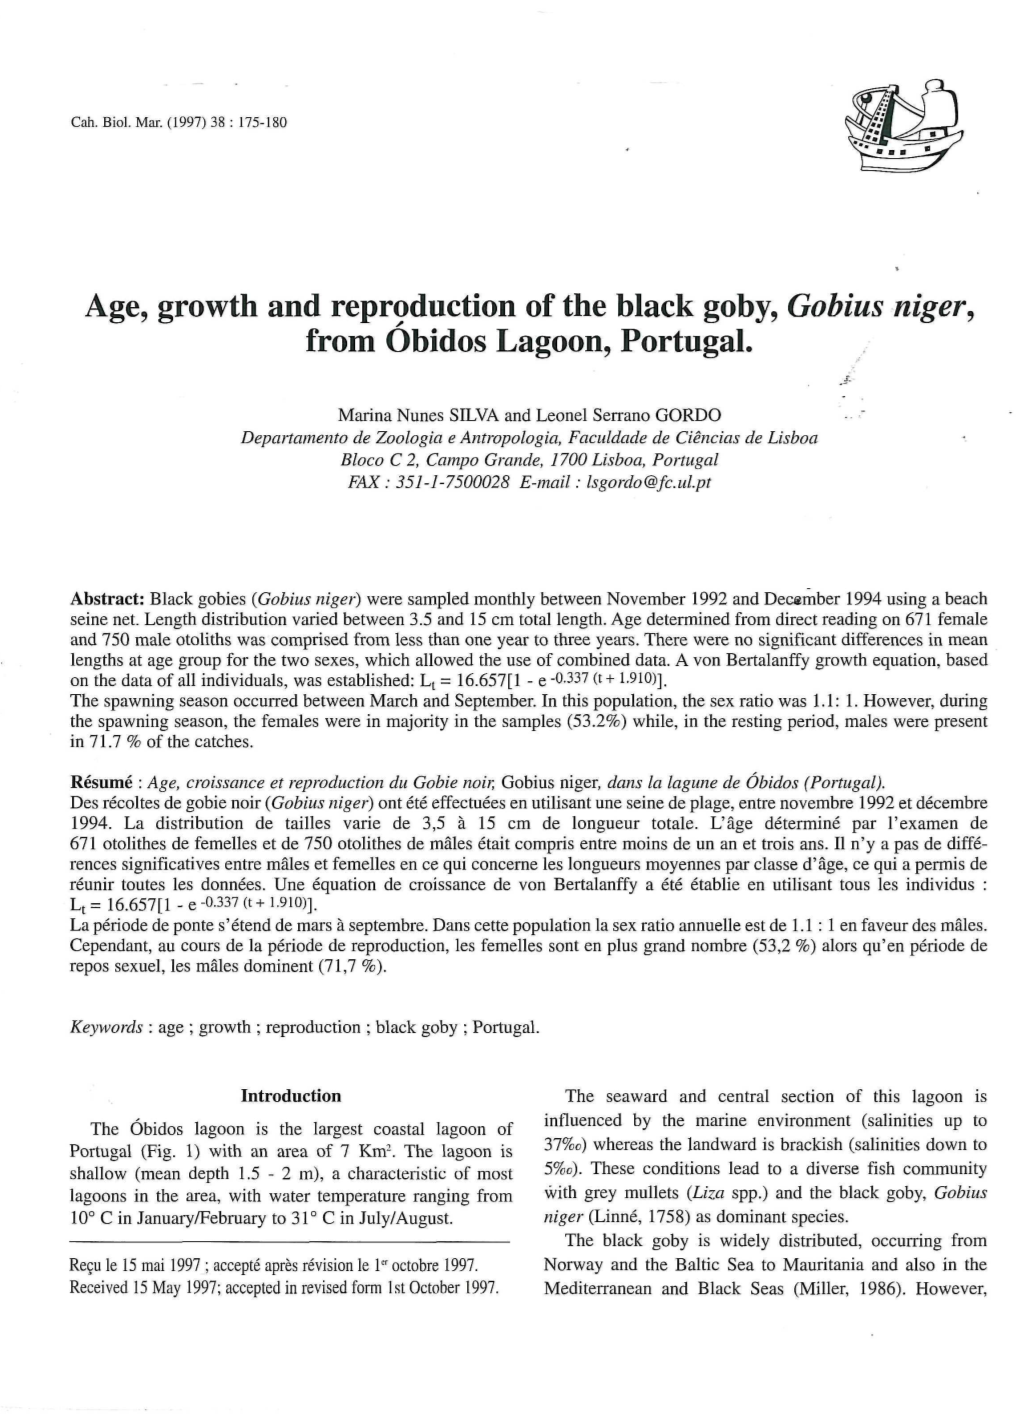 Age, Growth and Reproduction of the Black Goby, Gobius Niger, from Óbidos Lagoon, Portugal